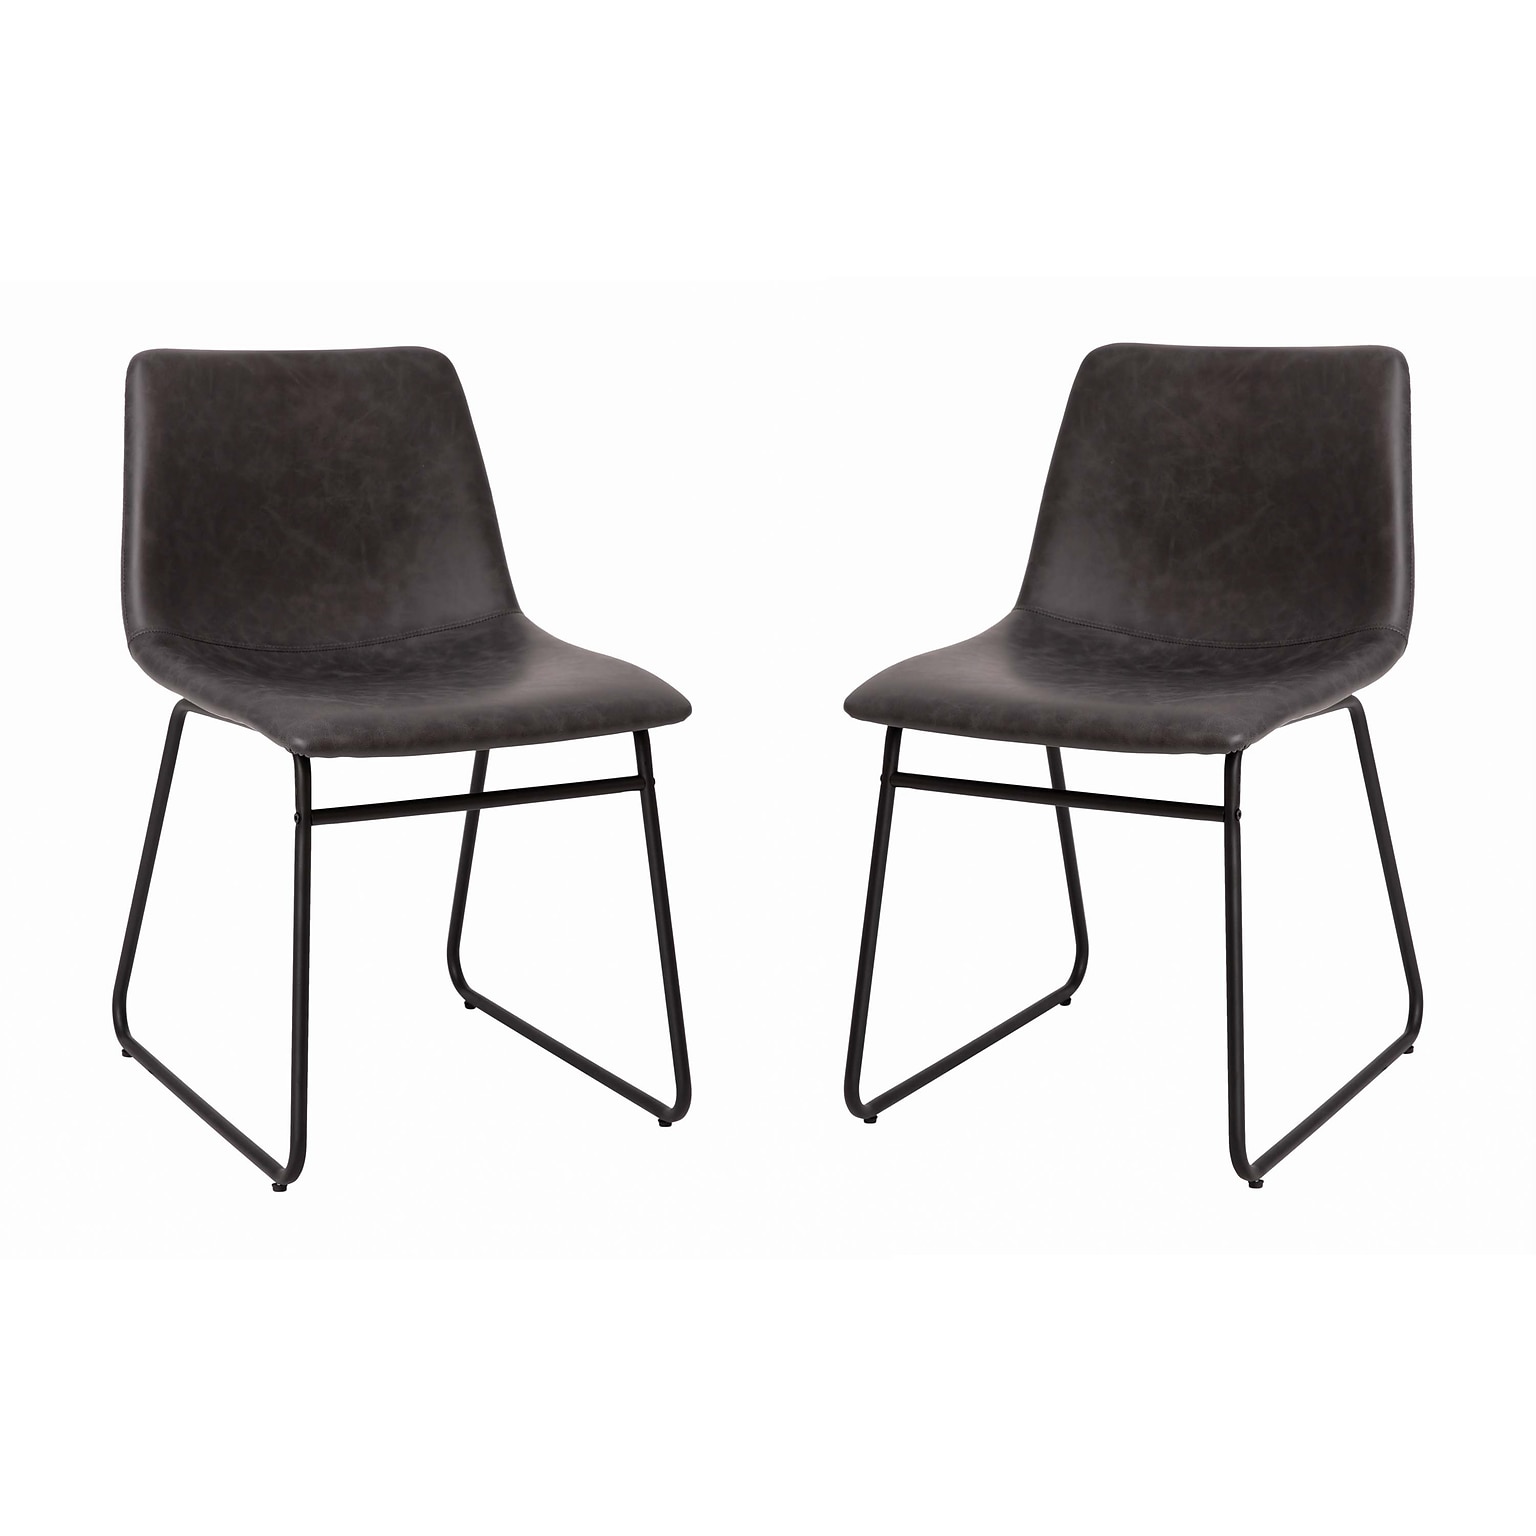 Flash Furniture Midcentury LeatherSoft Dining Chair, Gray LeatherSoft/Black Frame, Set of 2 (ETER1834518GYBK)